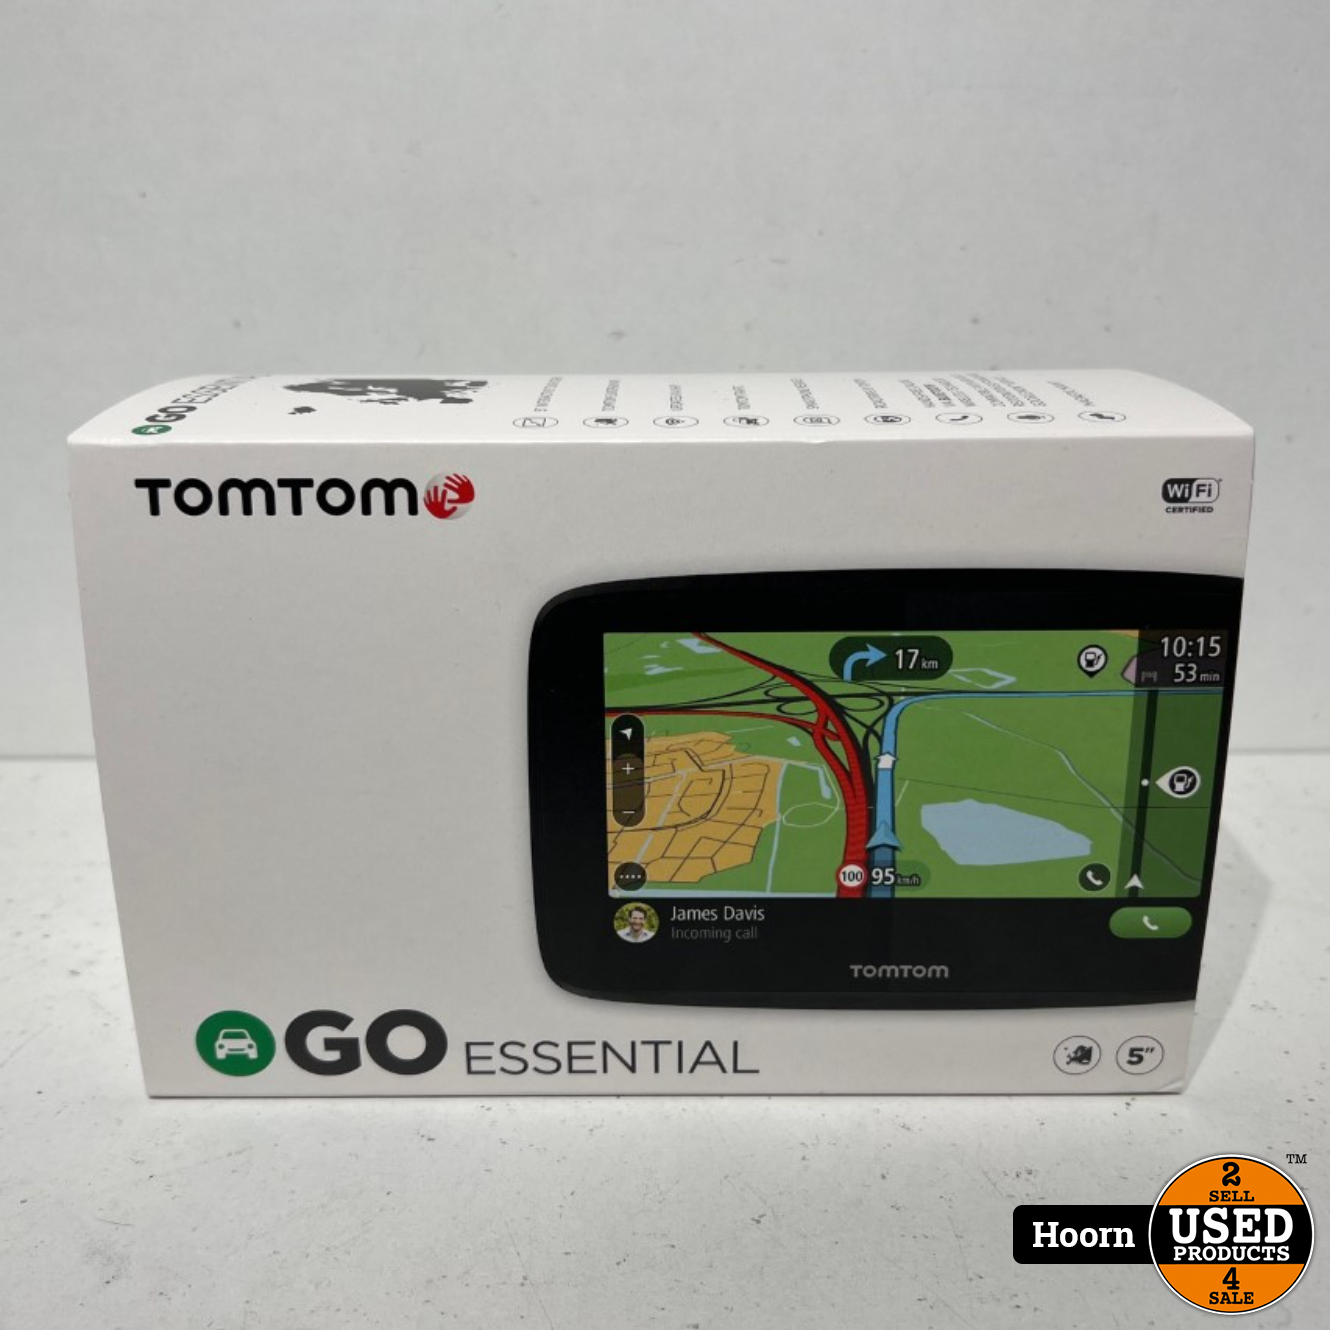 TOMTOM GO Essential 5 - Used Products